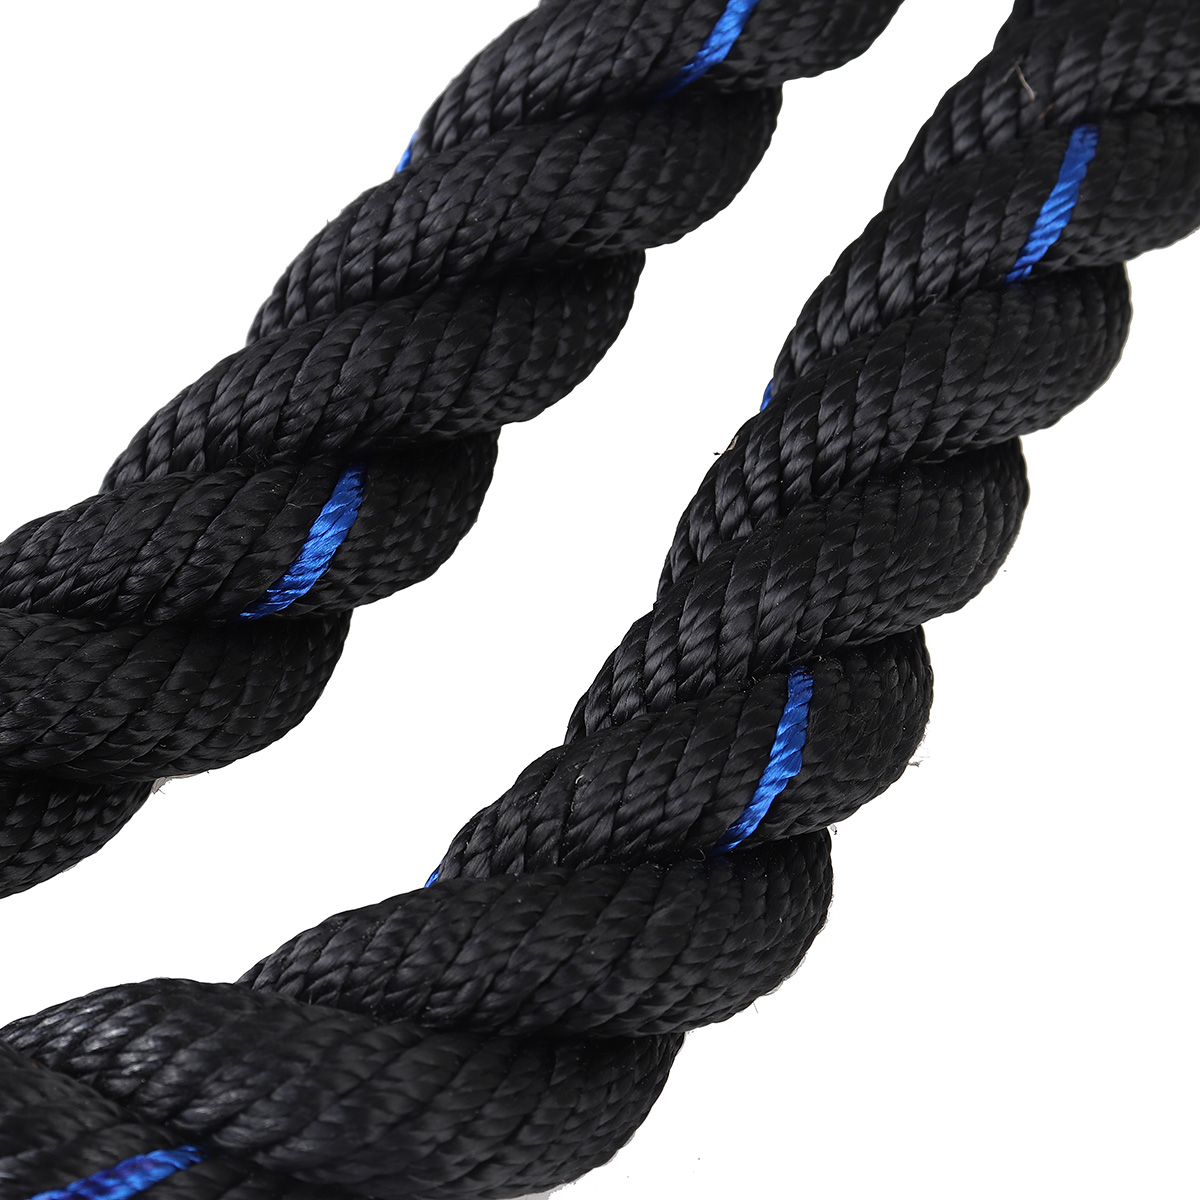 25mm-Heavy-Jump-Rope-Thicken-Weighted-Training-Battle-Skipping-Ropes-Muscle-Power-Training-Gym-Fitne-1706587-10